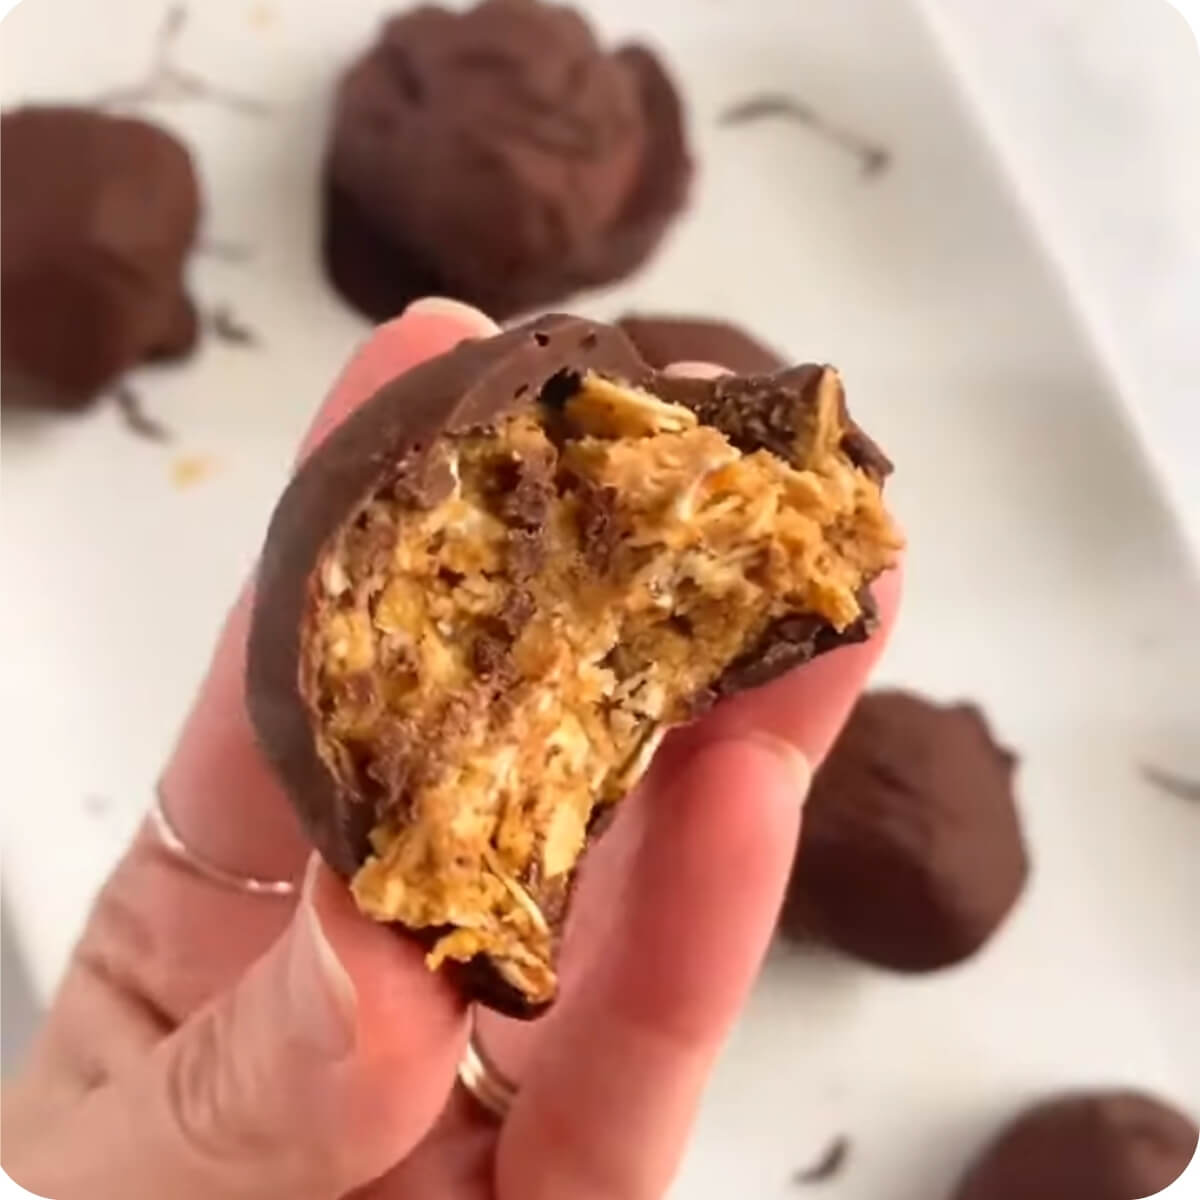 Bite sized serving of protein oatmeal covered in hard chocolate shell